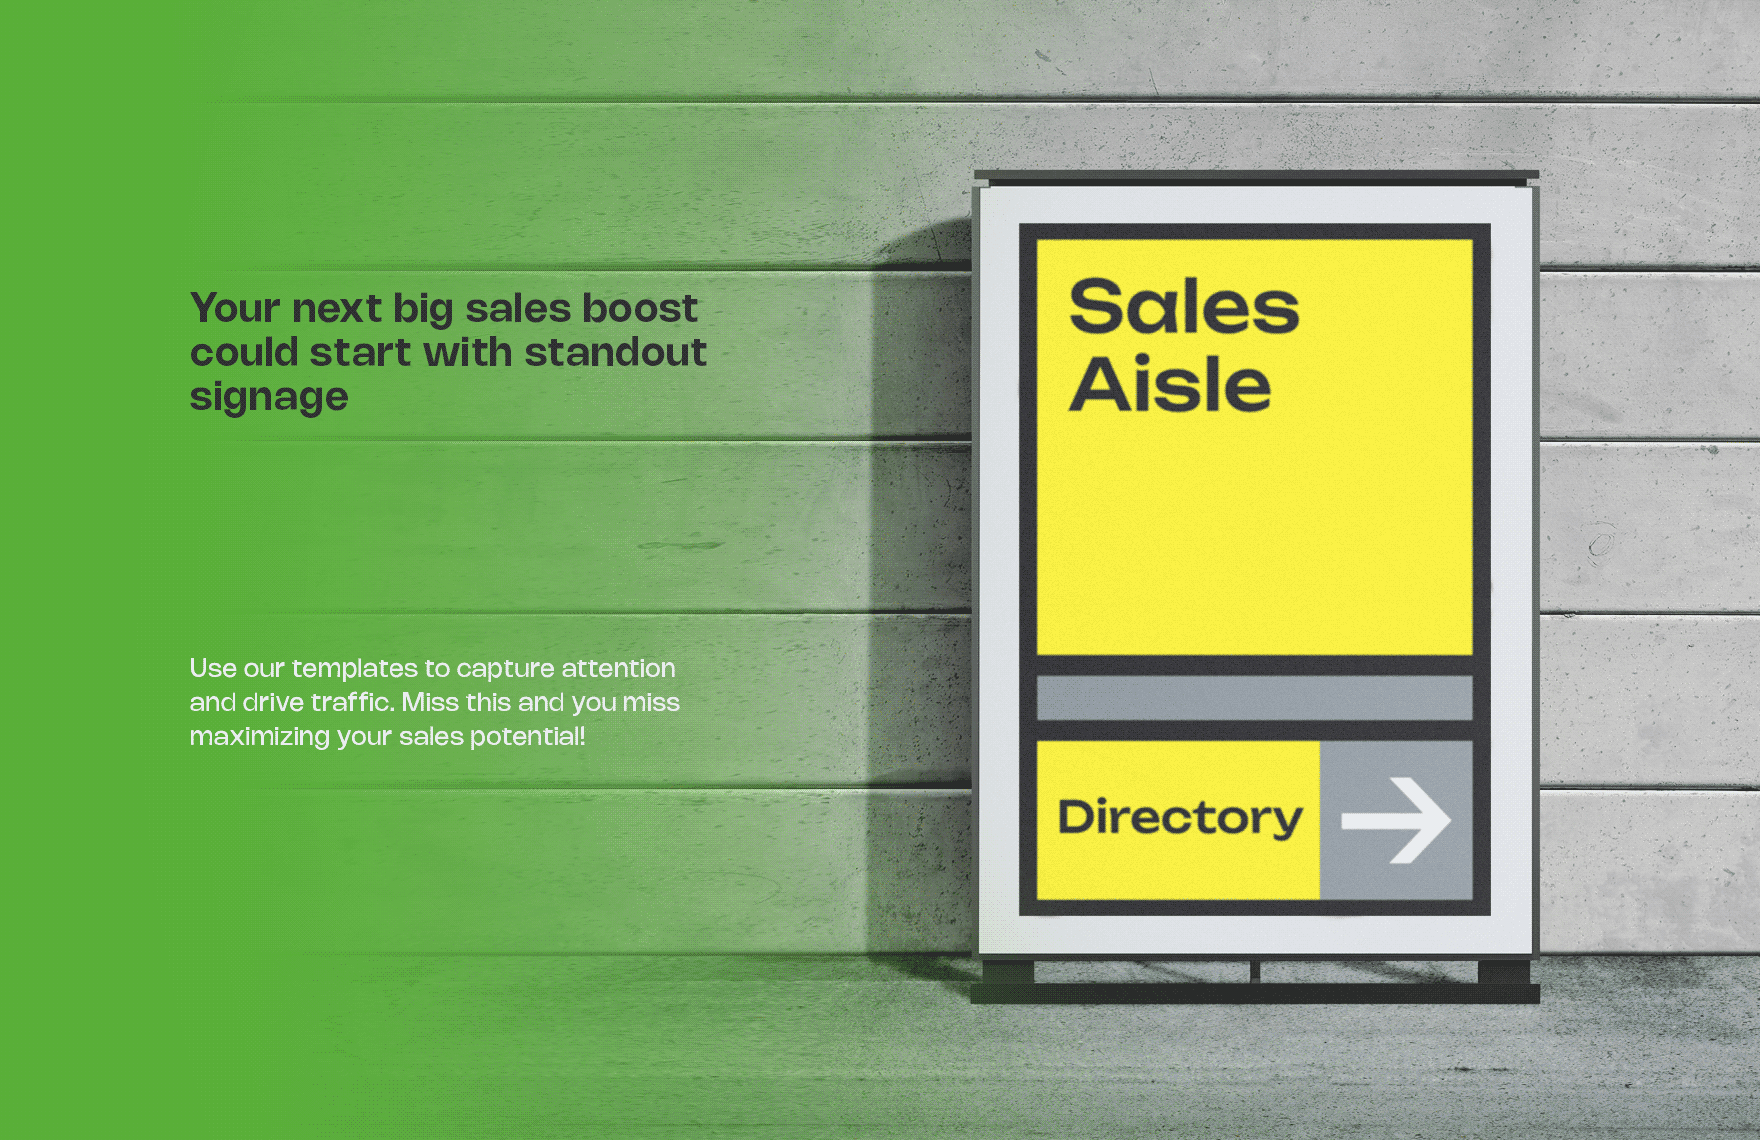 Sales Aisle Directory Signage Template